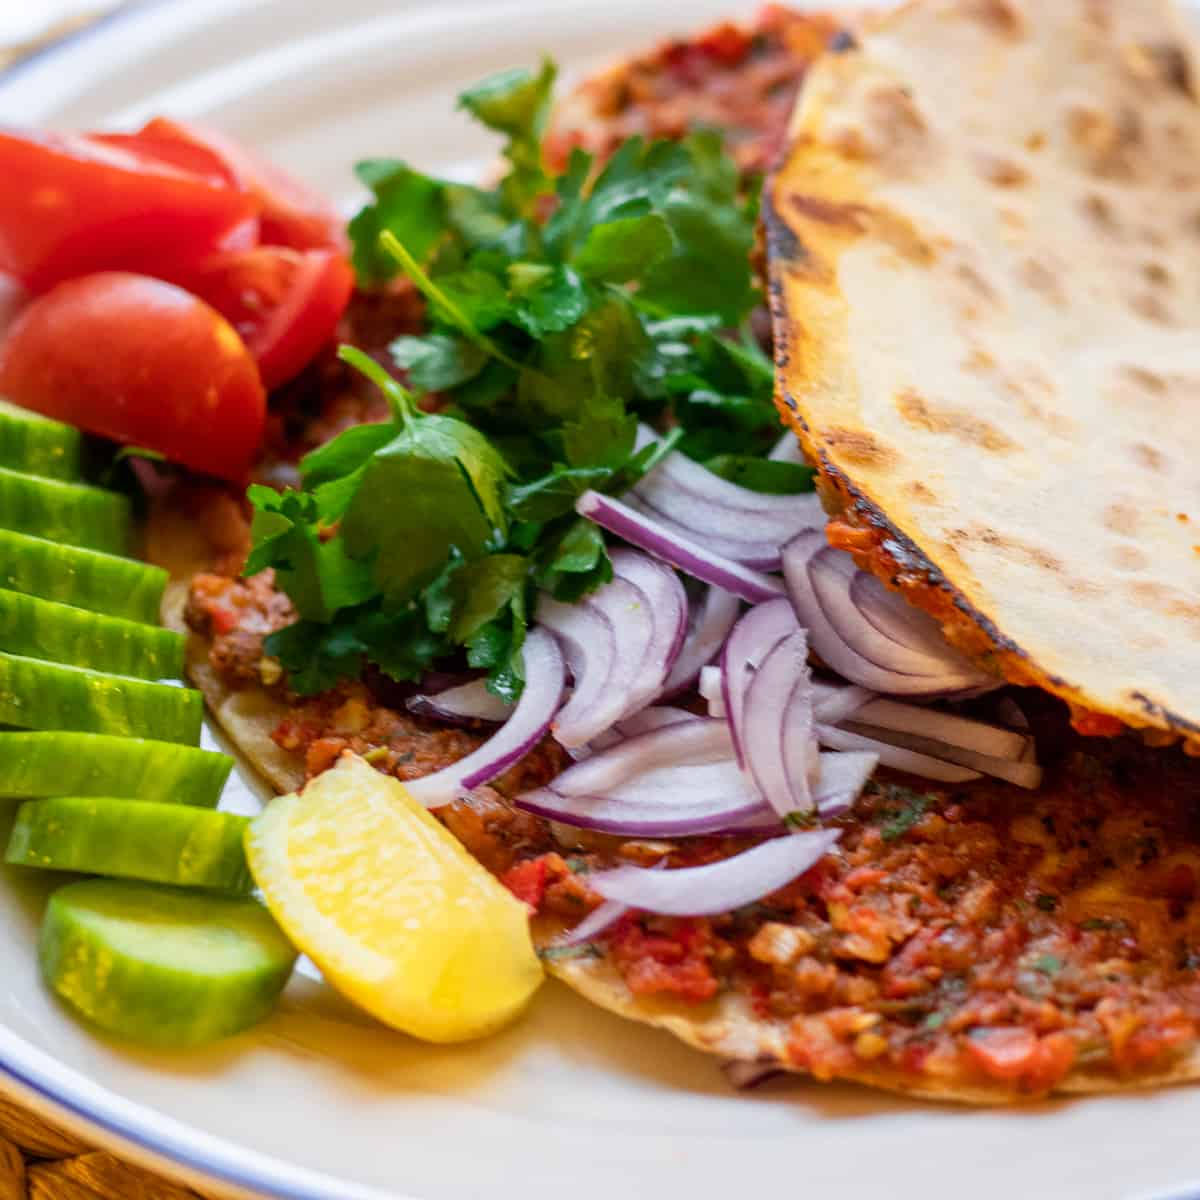 Turkish lahmacun served with salad